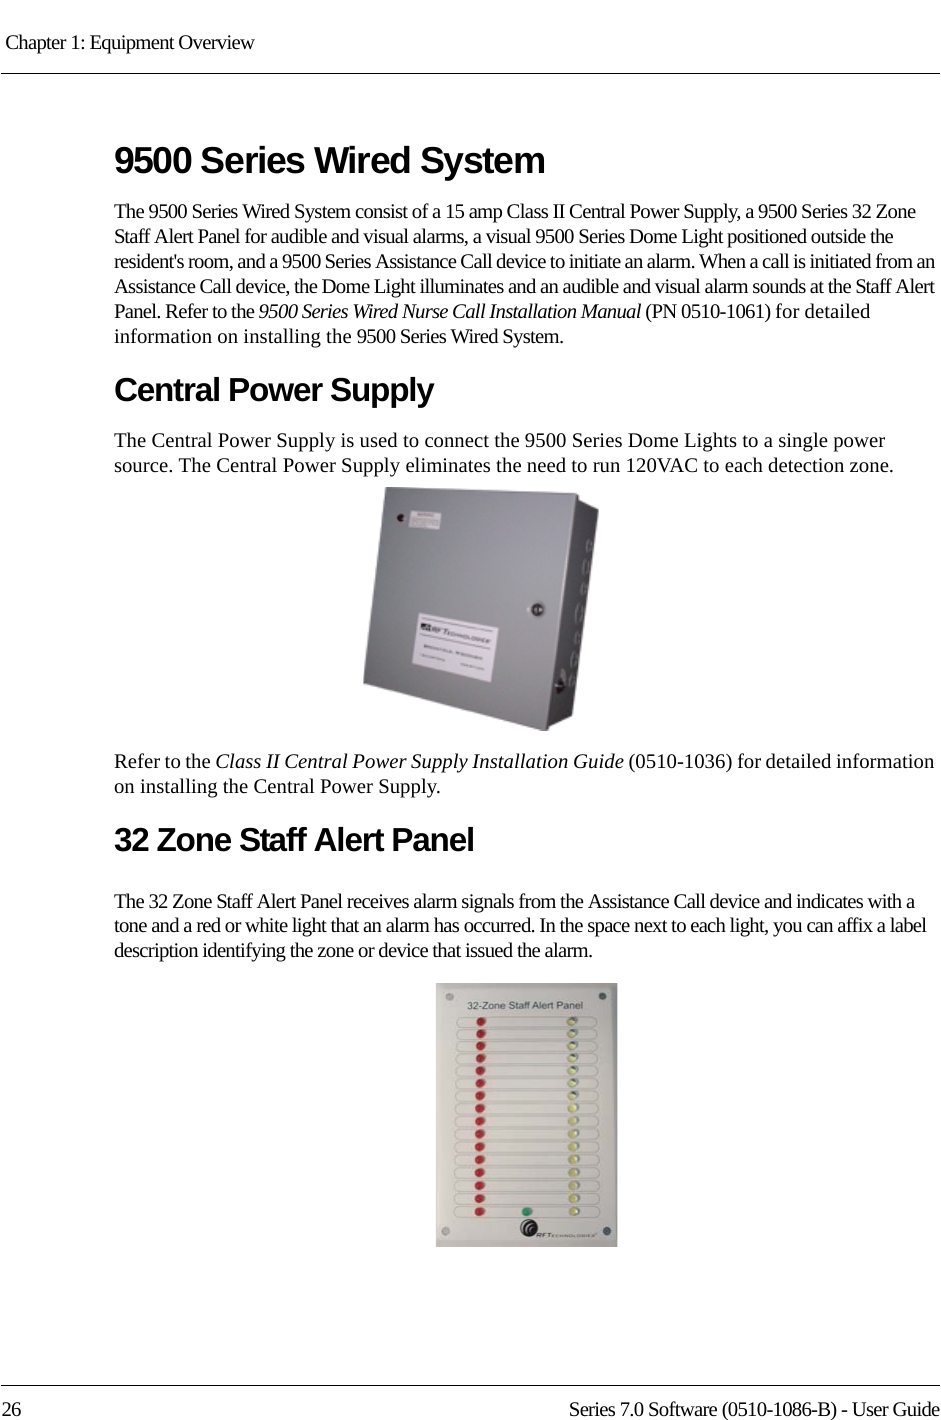 Chapter 1: Equipment Overview 26 Series 7.0 Software (0510-1086-B) - User Guide9500 Series Wired SystemThe 9500 Series Wired System consist of a 15 amp Class II Central Power Supply, a 9500 Series 32 Zone Staff Alert Panel for audible and visual alarms, a visual 9500 Series Dome Light positioned outside the resident&apos;s room, and a 9500 Series Assistance Call device to initiate an alarm. When a call is initiated from an Assistance Call device, the Dome Light illuminates and an audible and visual alarm sounds at the Staff Alert Panel. Refer to the 9500 Series Wired Nurse Call Installation Manual (PN 0510-1061) for detailed information on installing the 9500 Series Wired System.Central Power SupplyThe Central Power Supply is used to connect the 9500 Series Dome Lights to a single power source. The Central Power Supply eliminates the need to run 120VAC to each detection zone.Refer to the Class II Central Power Supply Installation Guide (0510-1036) for detailed information on installing the Central Power Supply.32 Zone Staff Alert PanelThe 32 Zone Staff Alert Panel receives alarm signals from the Assistance Call device and indicates with a tone and a red or white light that an alarm has occurred. In the space next to each light, you can affix a label description identifying the zone or device that issued the alarm.